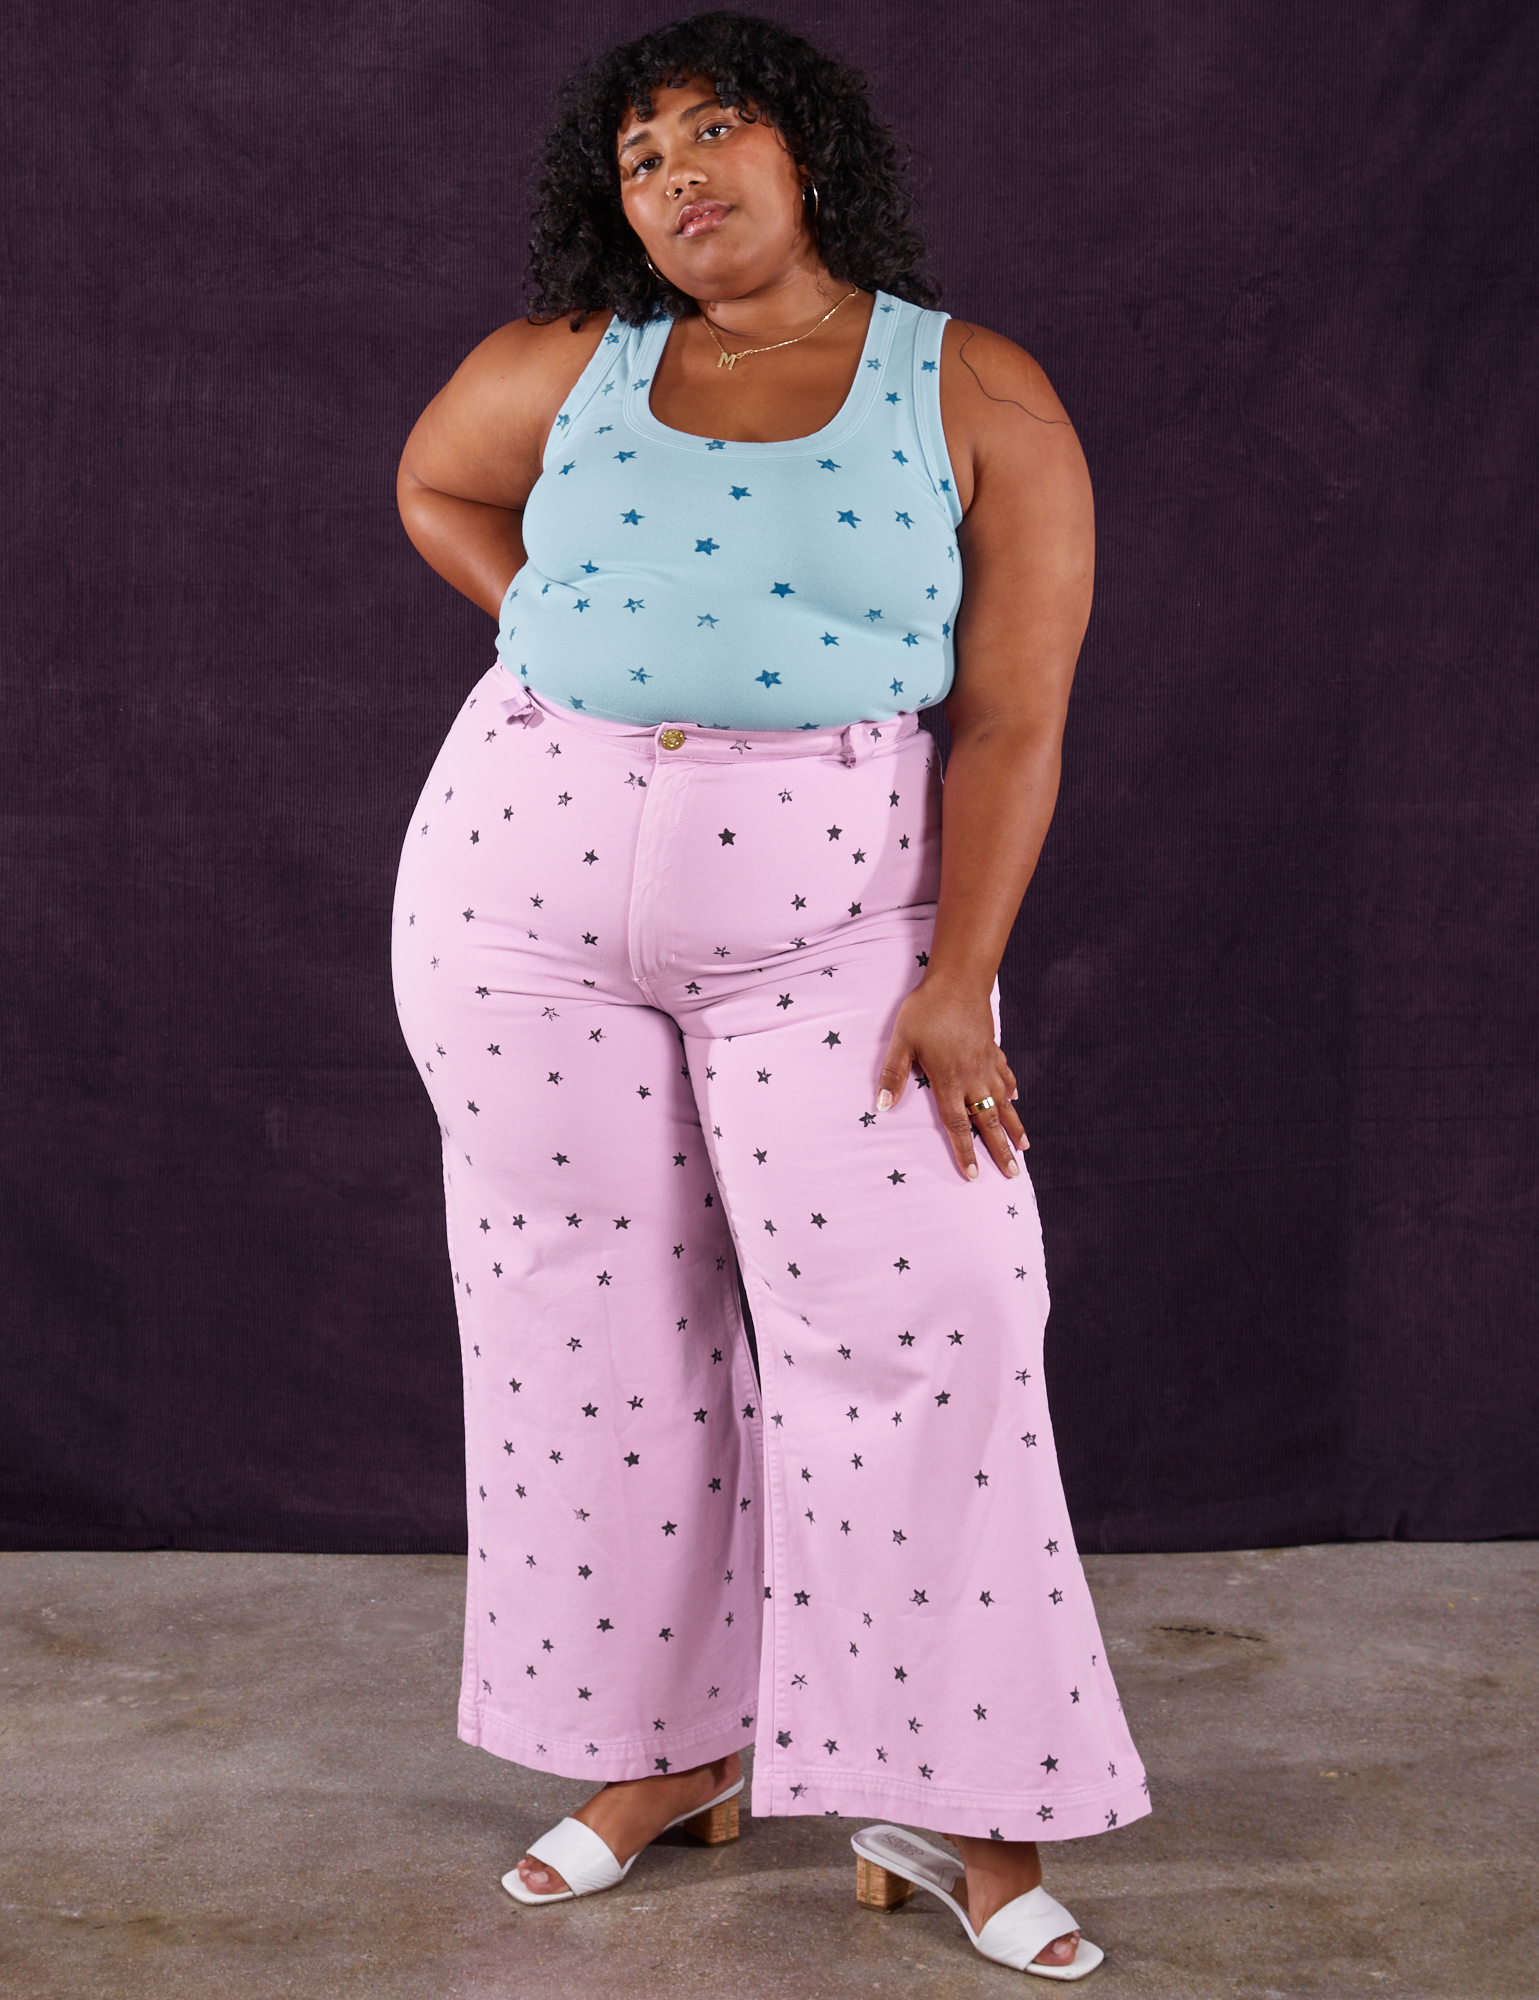 Morgan is wearing Star Bell Bottoms in Lilac Purple and Star Cropped Tank in blue